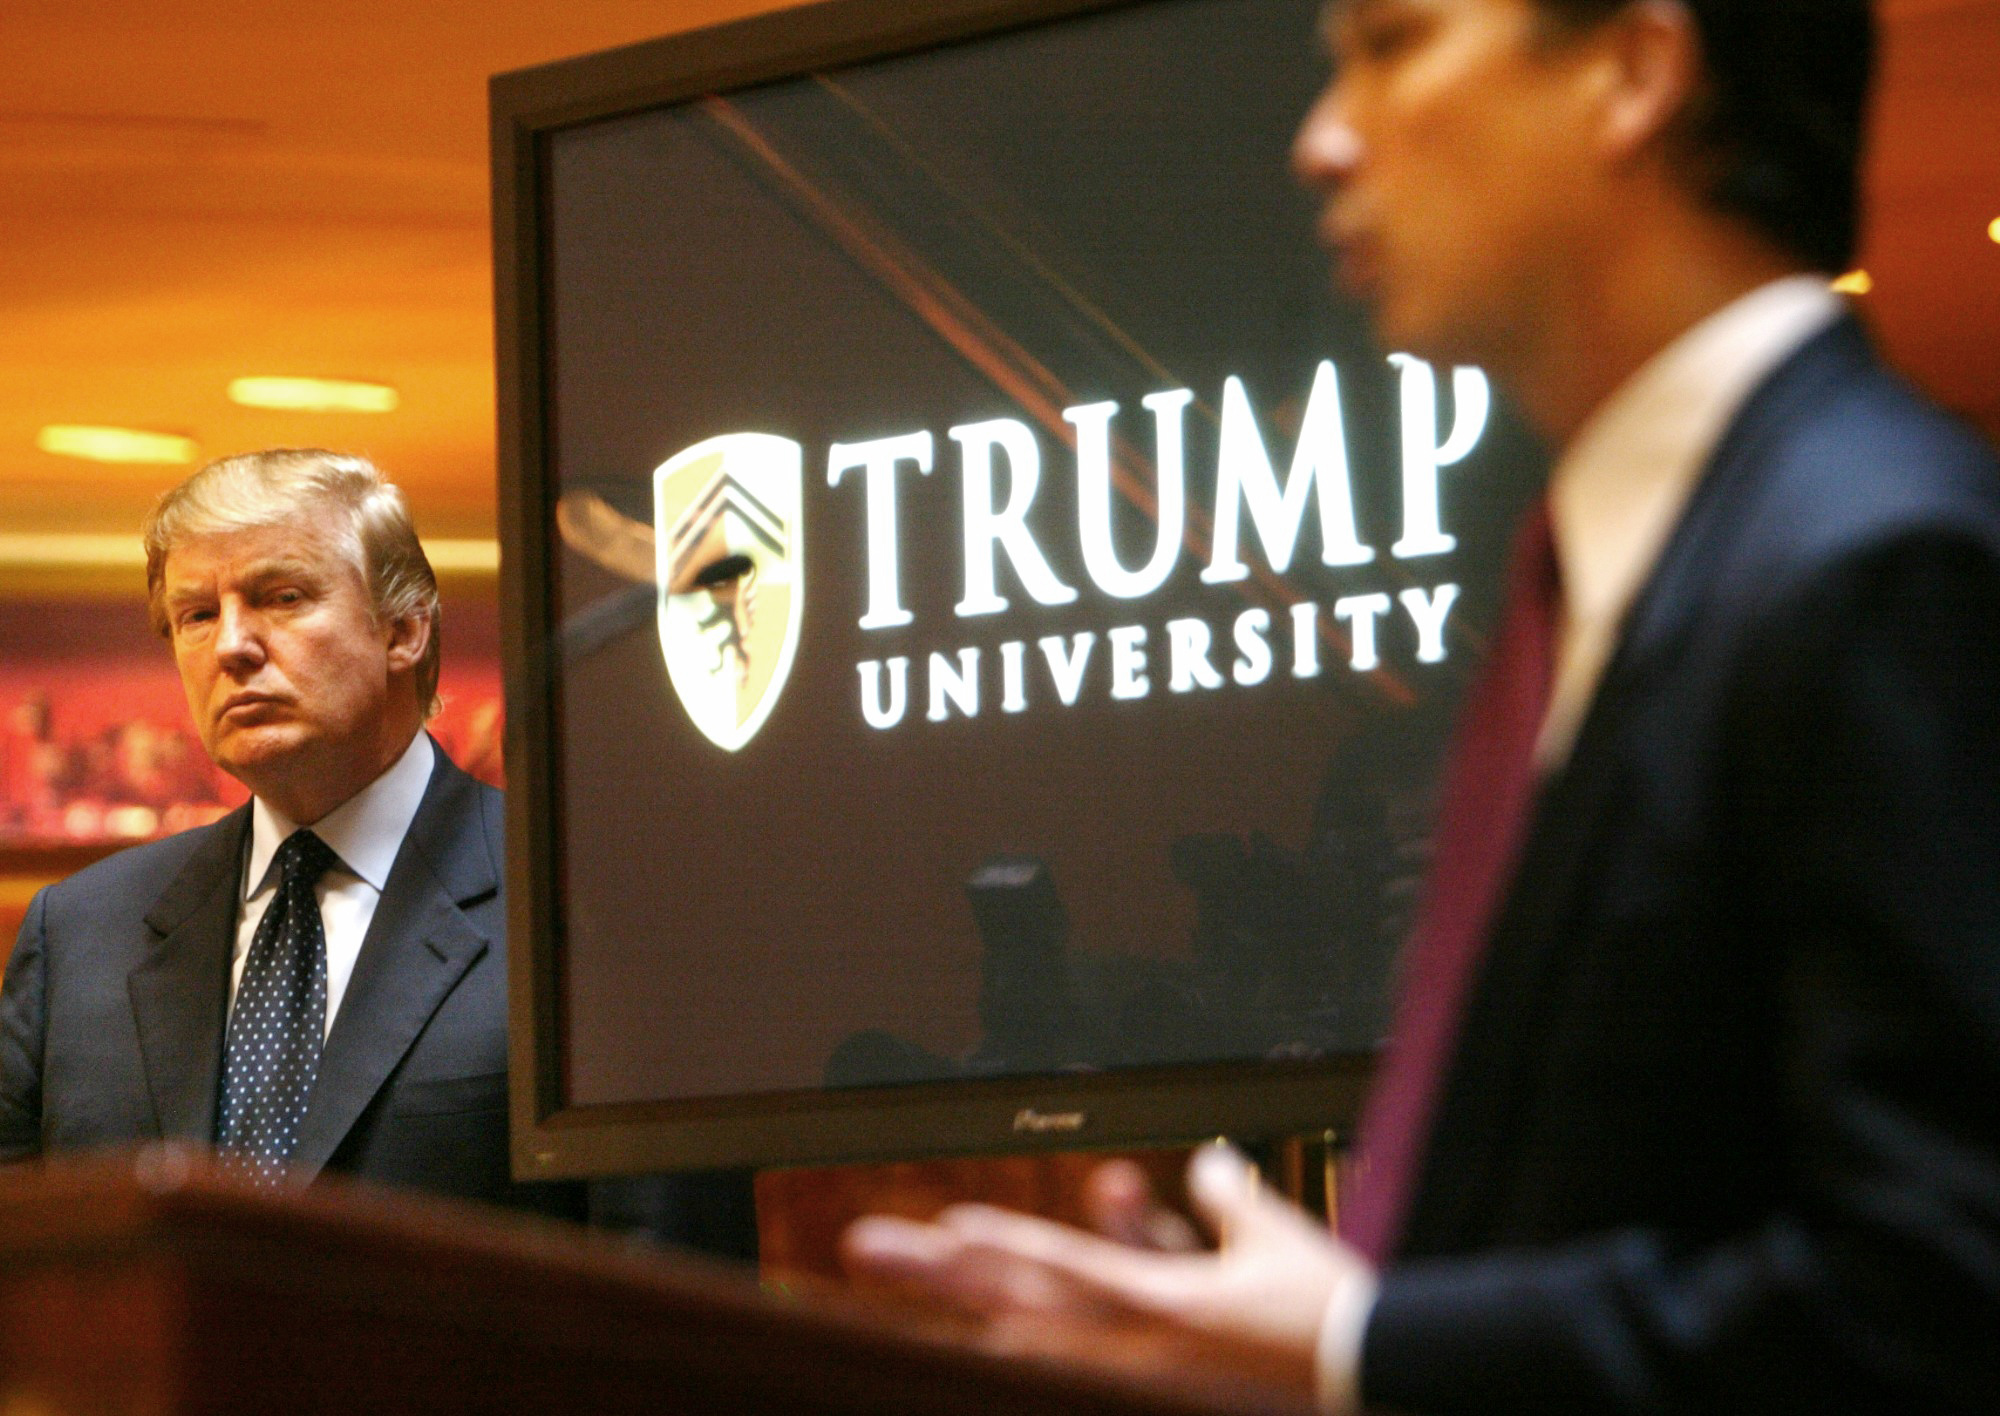 Donald Trump listens as Michael Sexton introduces him at a news conference in New York where he announced the establishment of Trump University on May 23, 2005.